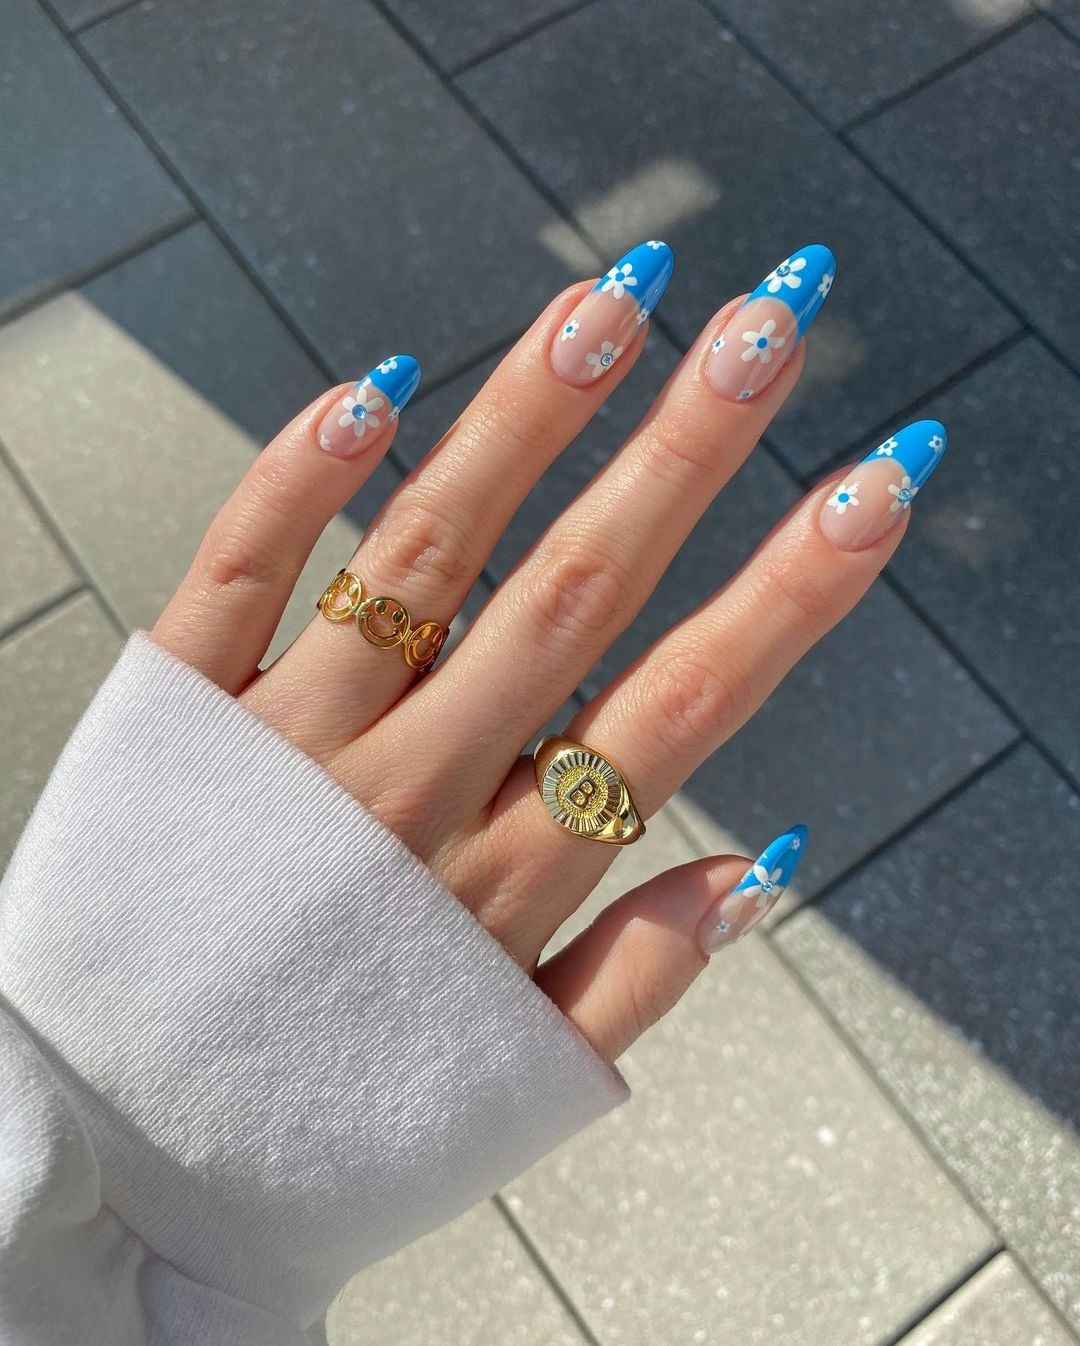 24 French Tip Almond Nails Designs You're Going to Love